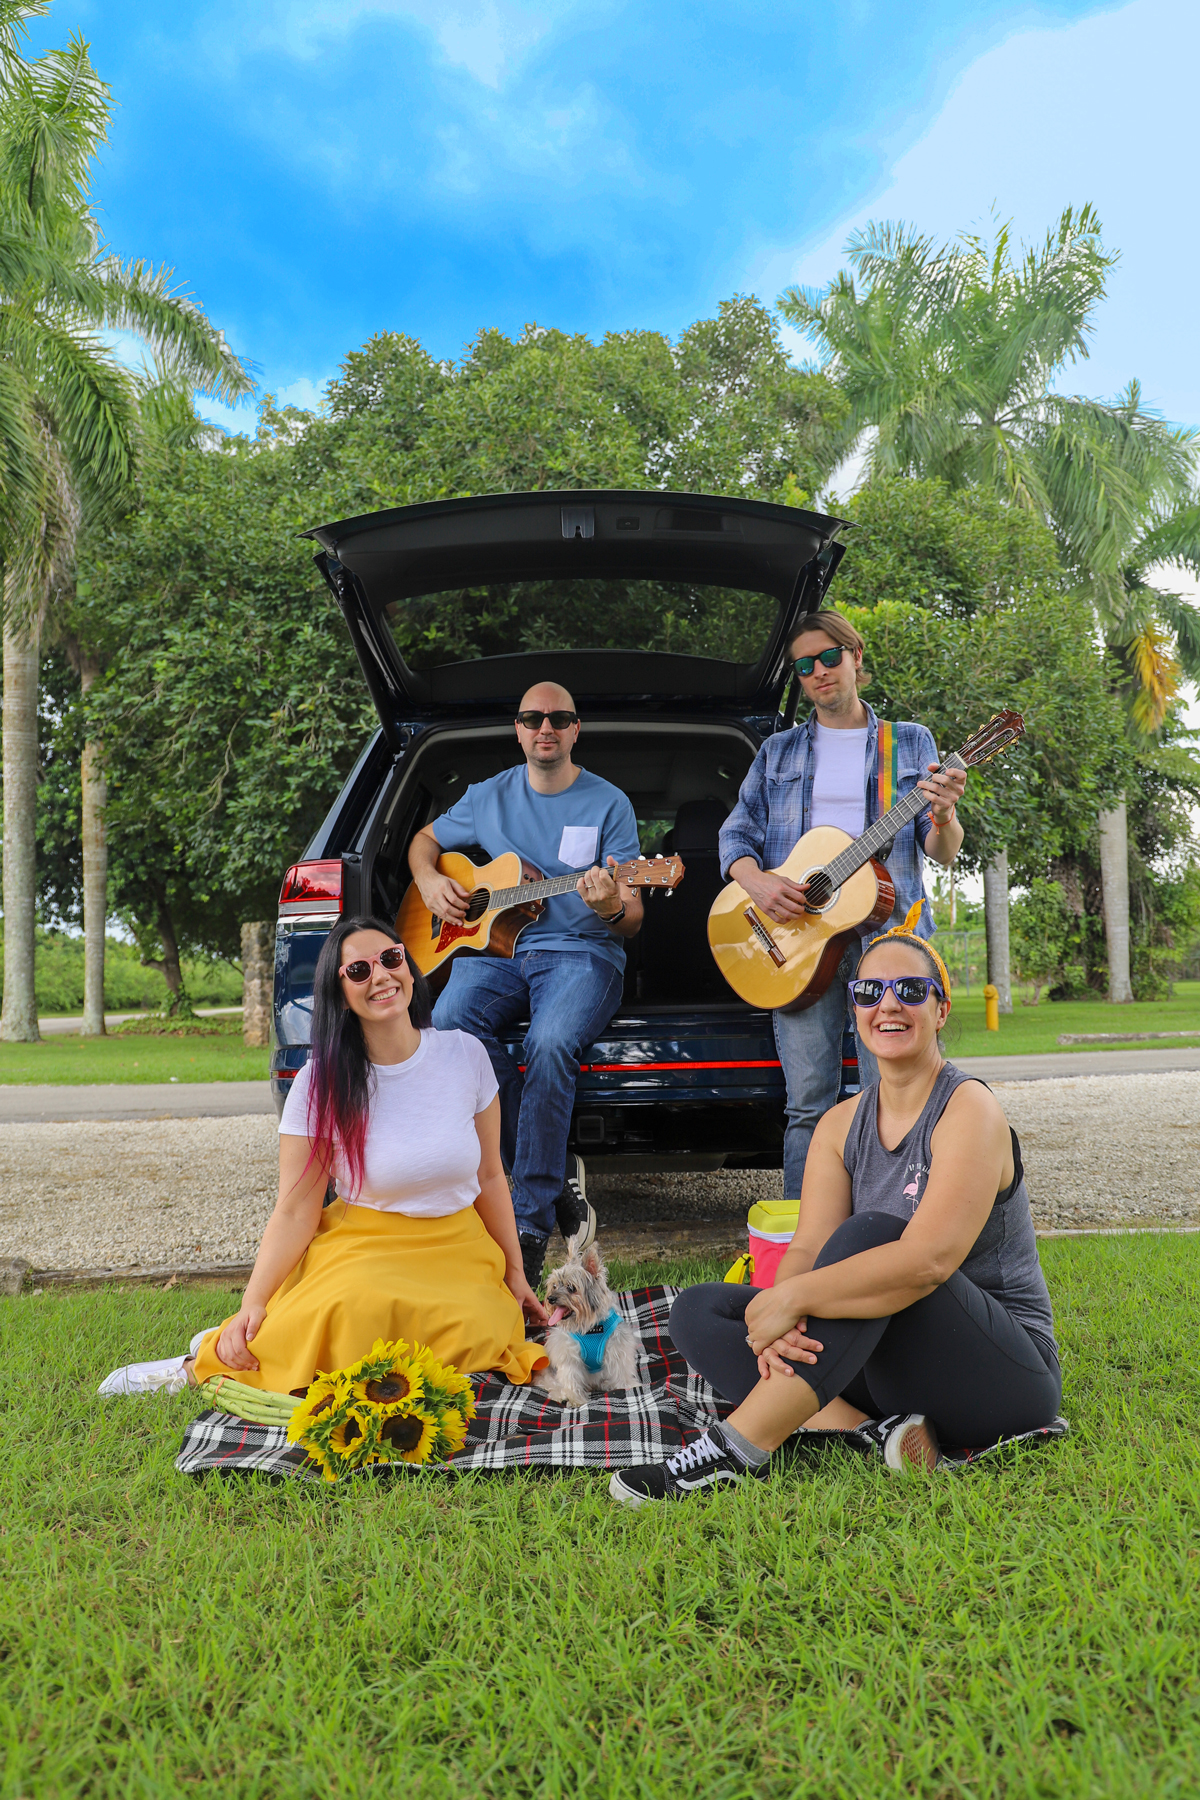 Fun Things To Do in Homestead, Florida - Have a picnic at the Fruit & Spice Park